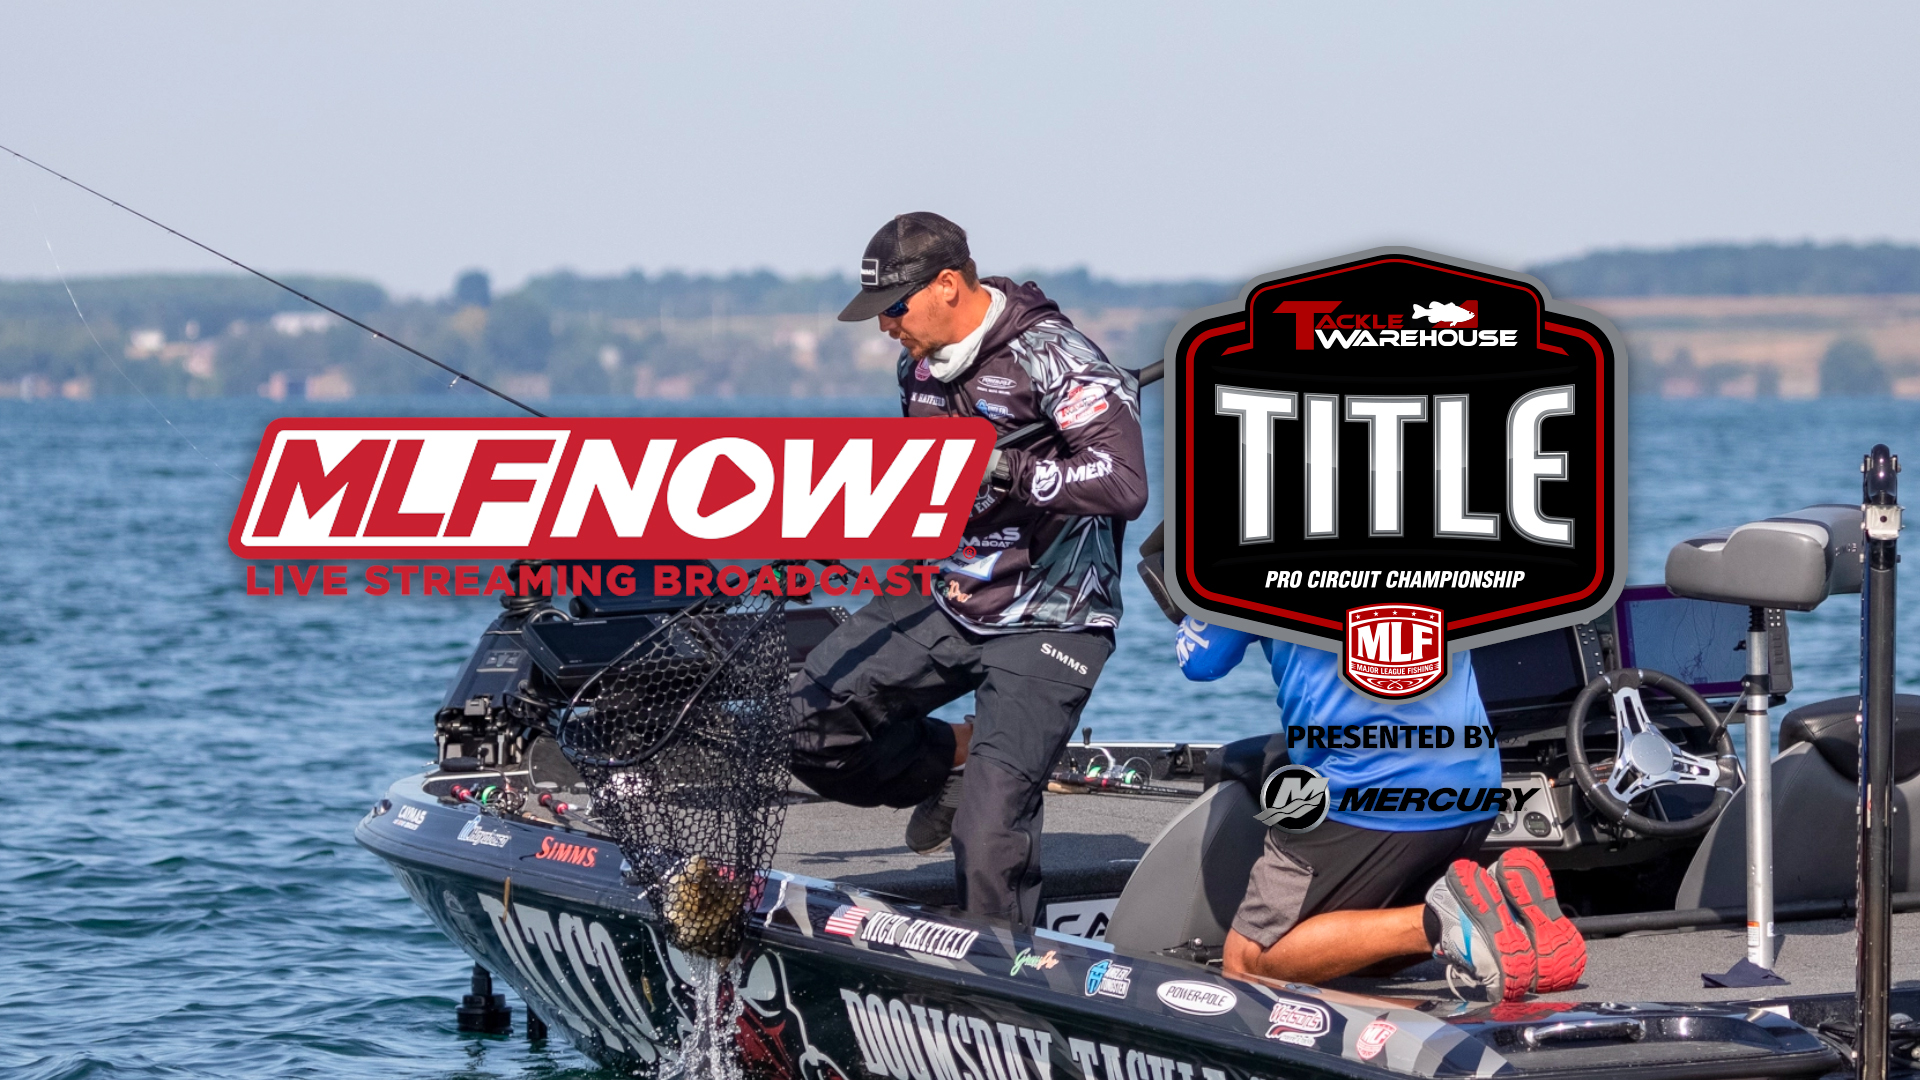 Tackle Warehouse TITLE, MLF NOW! Live Stream, Day 4 (8/19/2022) Major